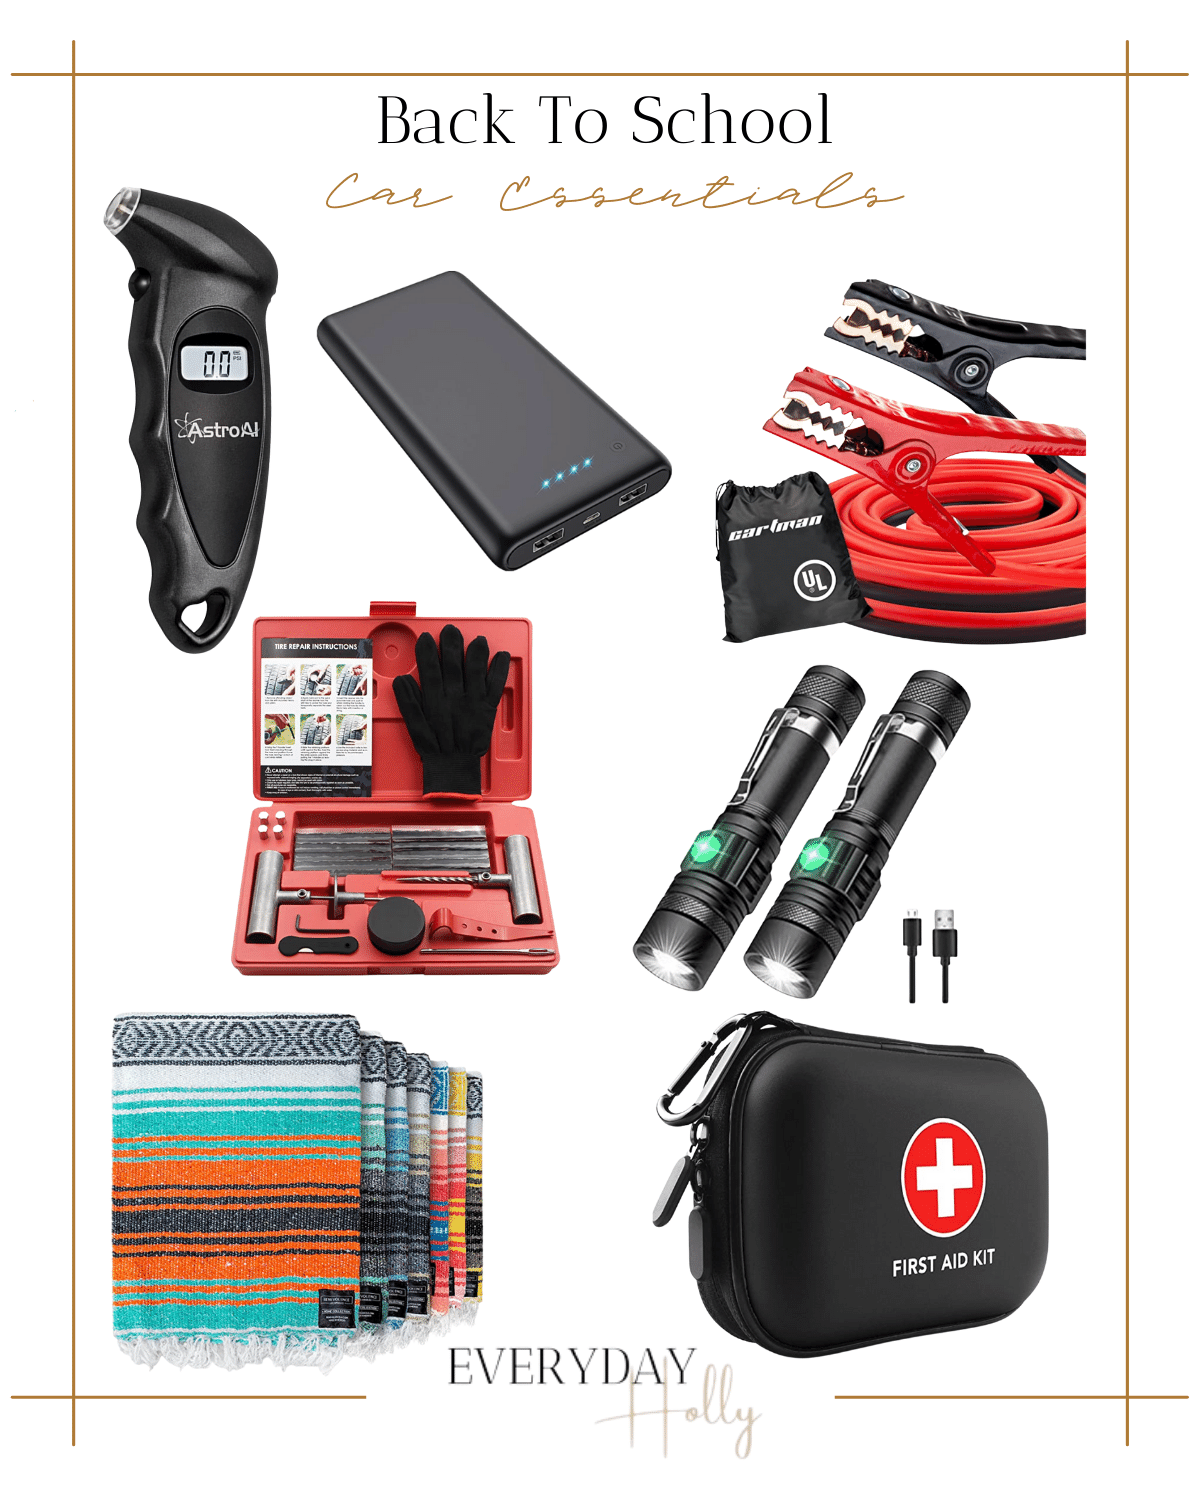 Back to School Car Essentials

#backtoschool #backtoschoolessentials #backtoschoolshopping #car #caressentials #blanket #jumpercables #firstaidkit #flashlight #portablecharger